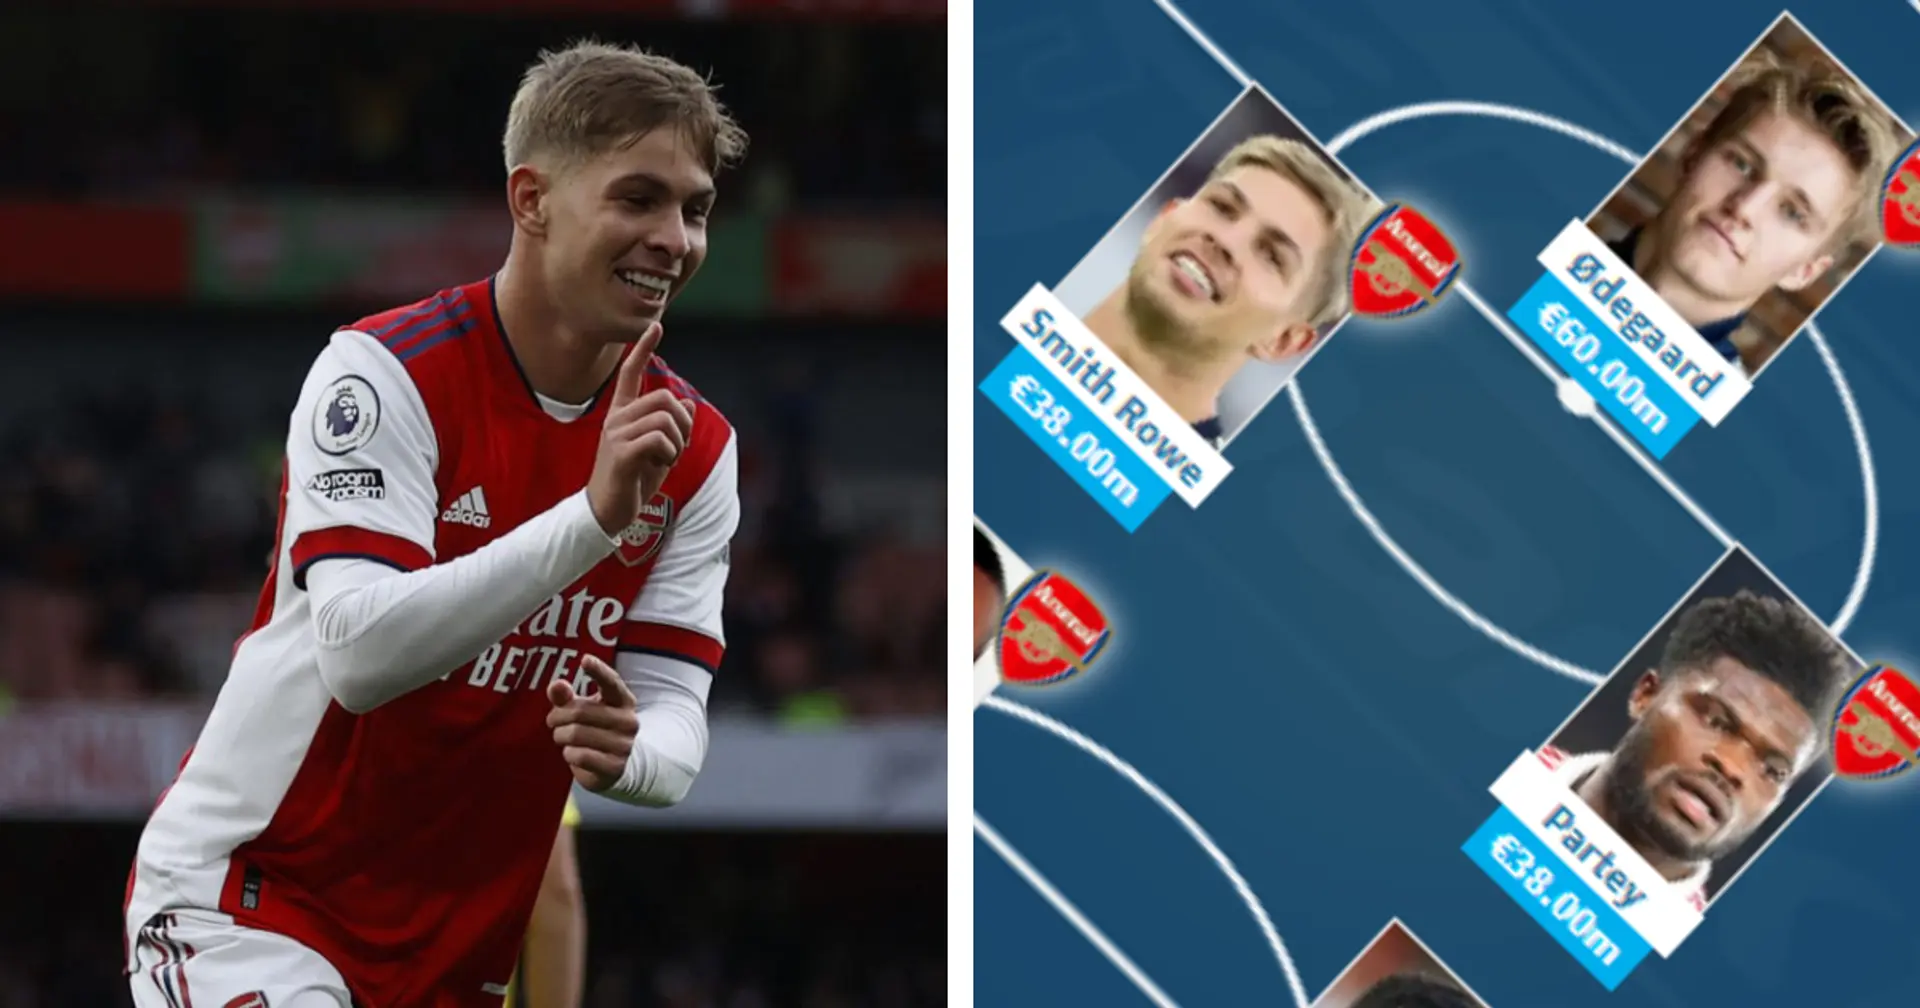 No Xhaka, Smith Rowe in: updated Arsenal's most expensive starting XI